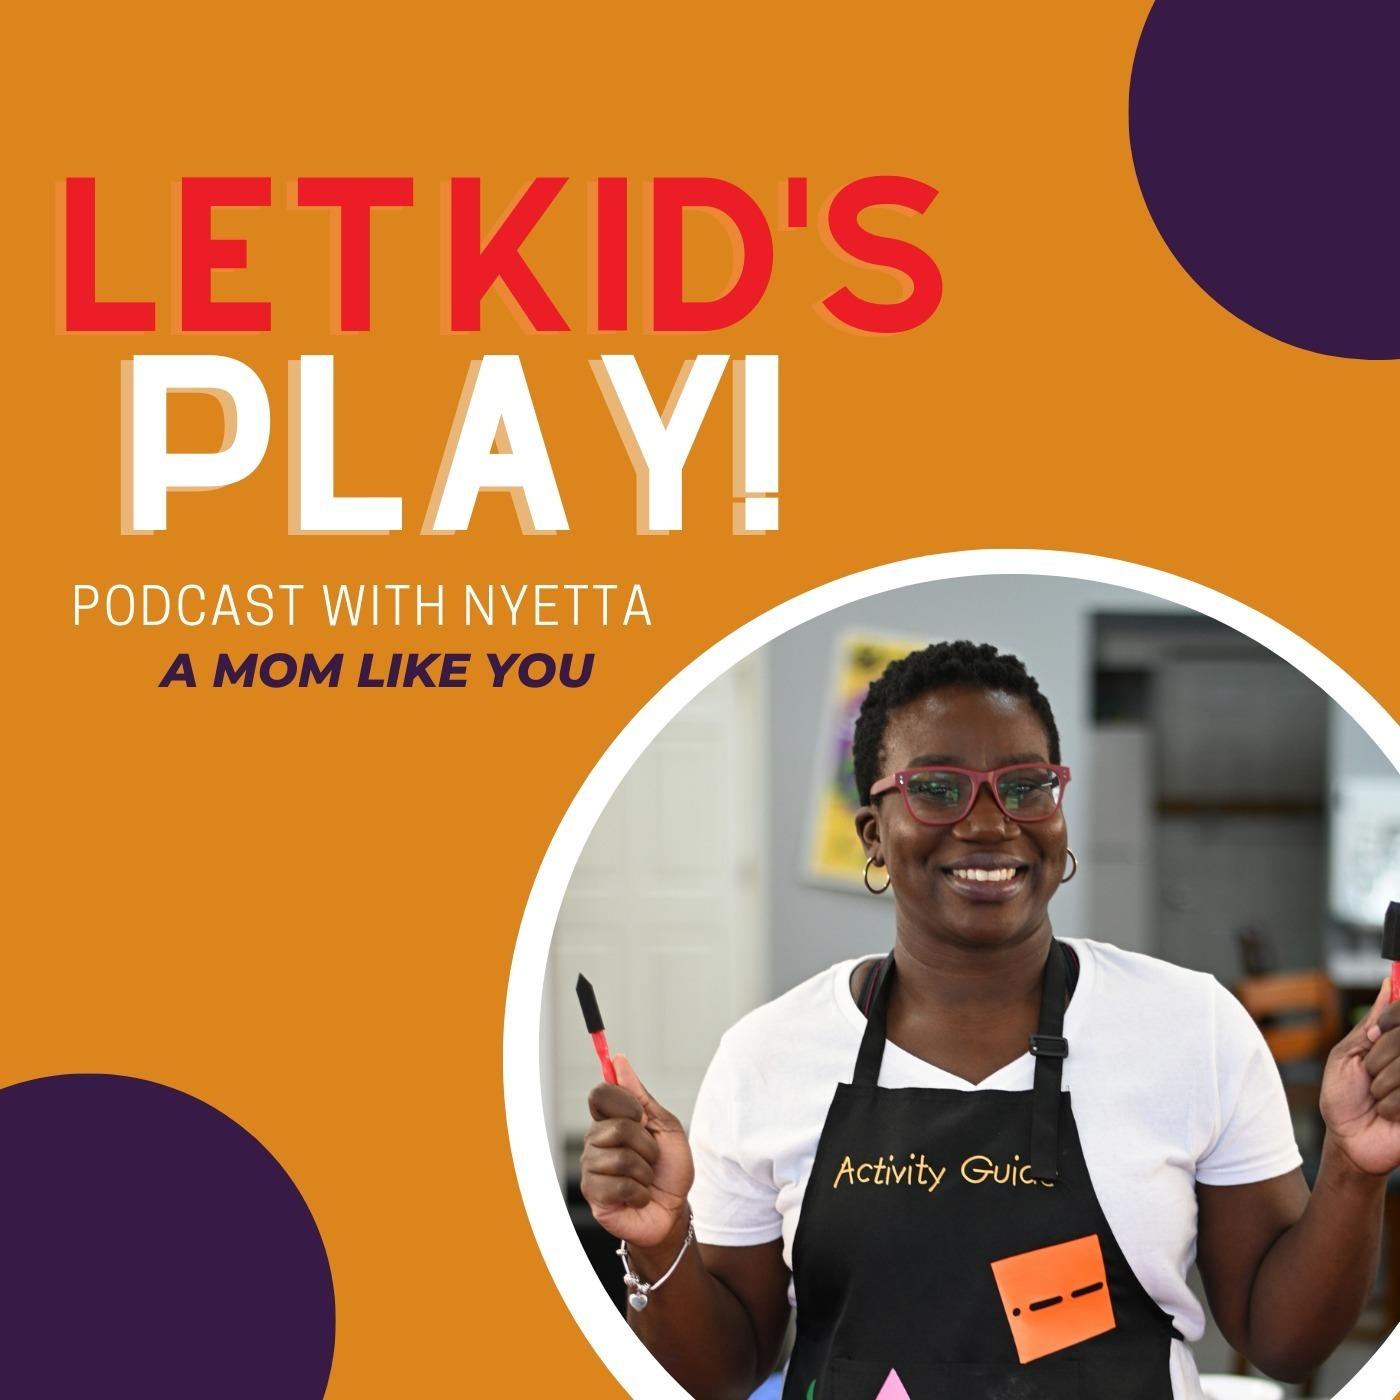 Let Kid's Play! Podcast